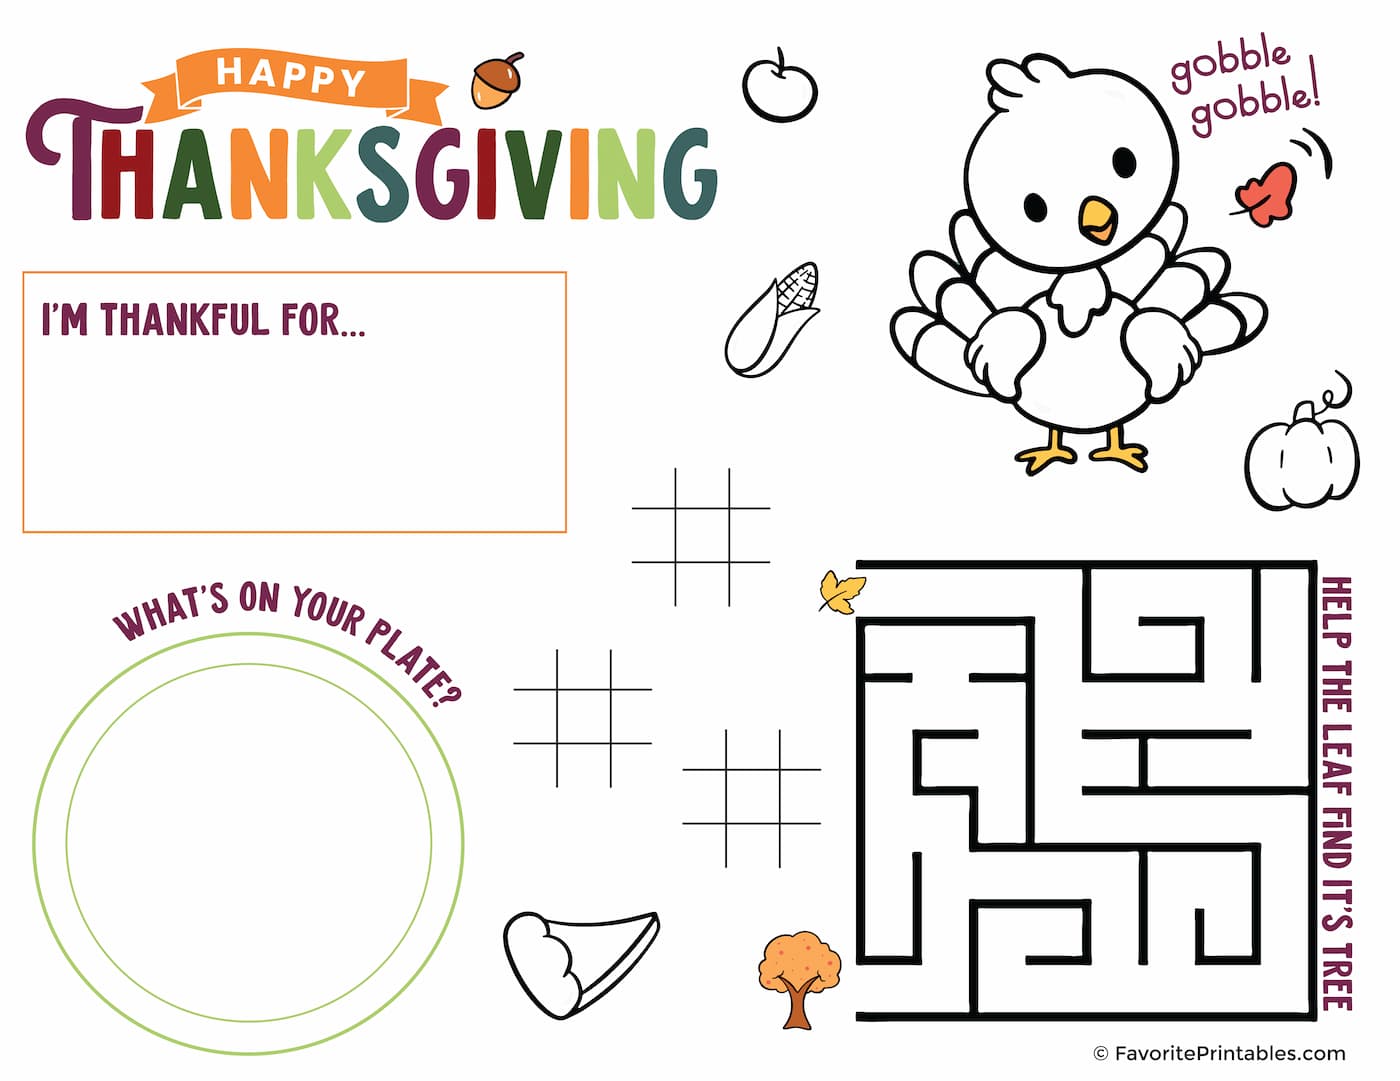 Thanksgiving activity sheet preview.